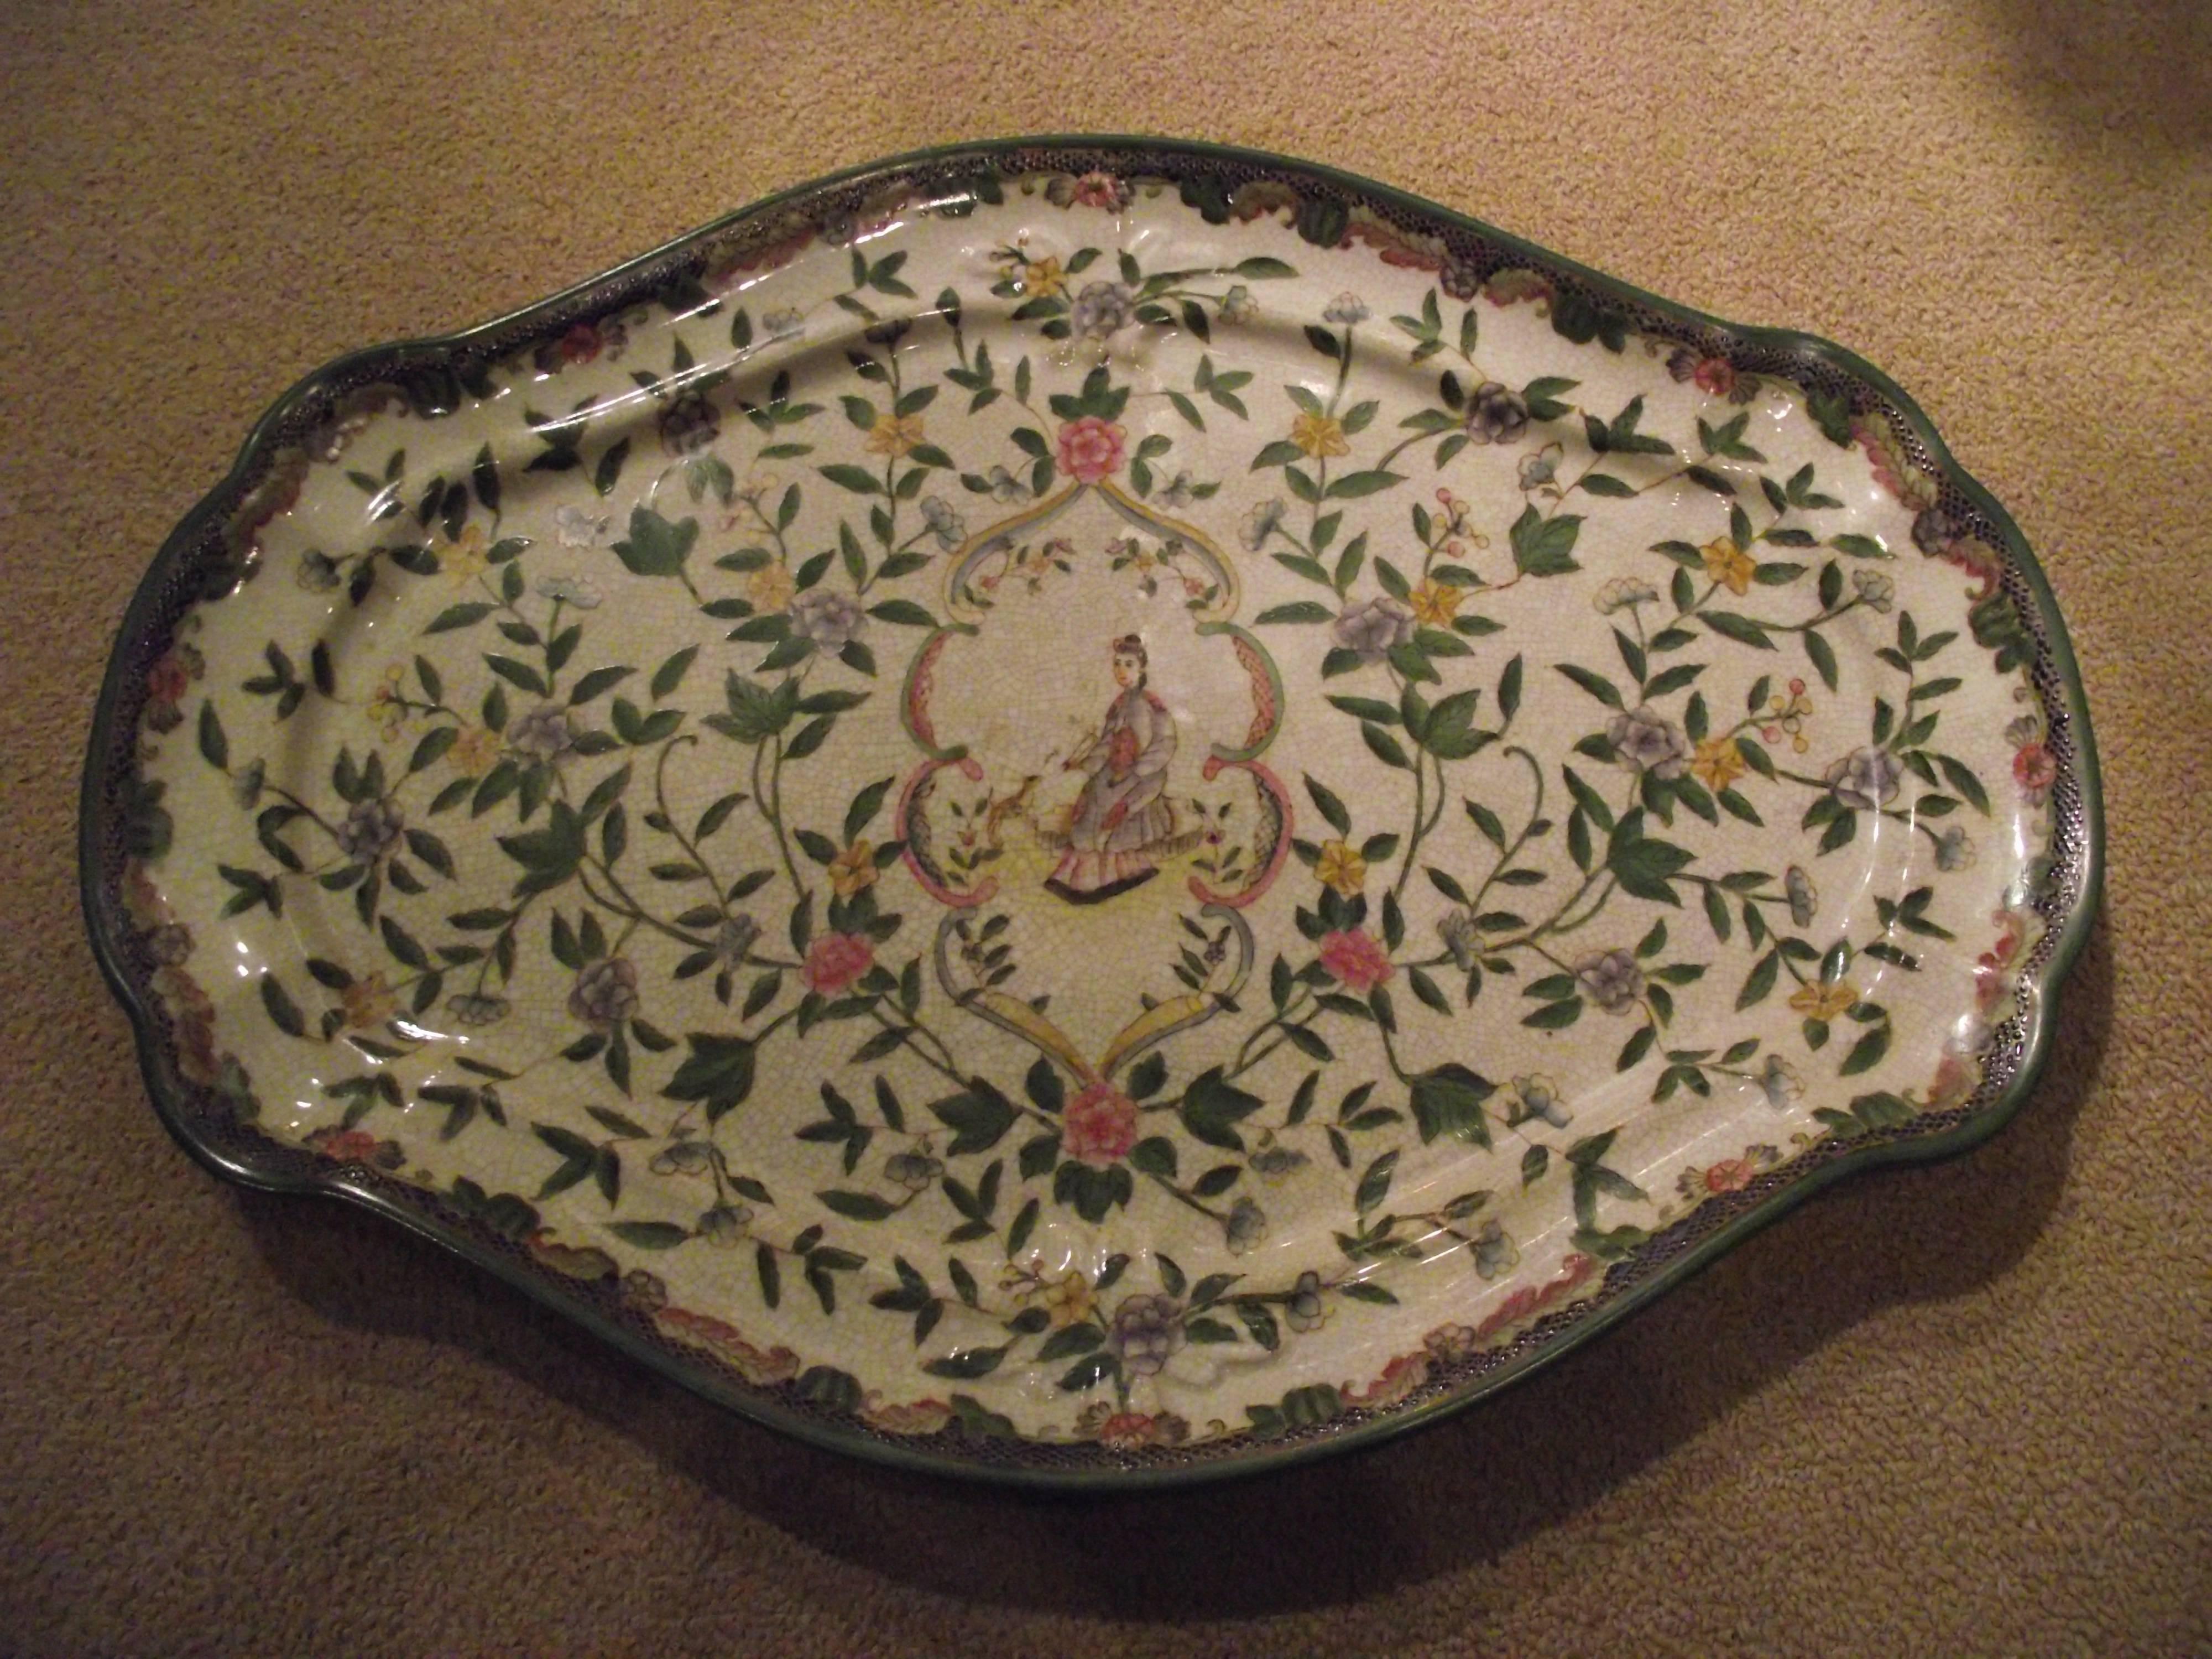 These beautifully detailed pottery platter and plates have a warm crackled aged appearance.

They look to be hand-painted but are more likely decals.

The edge design of the plates is pierced.

The platter is 14